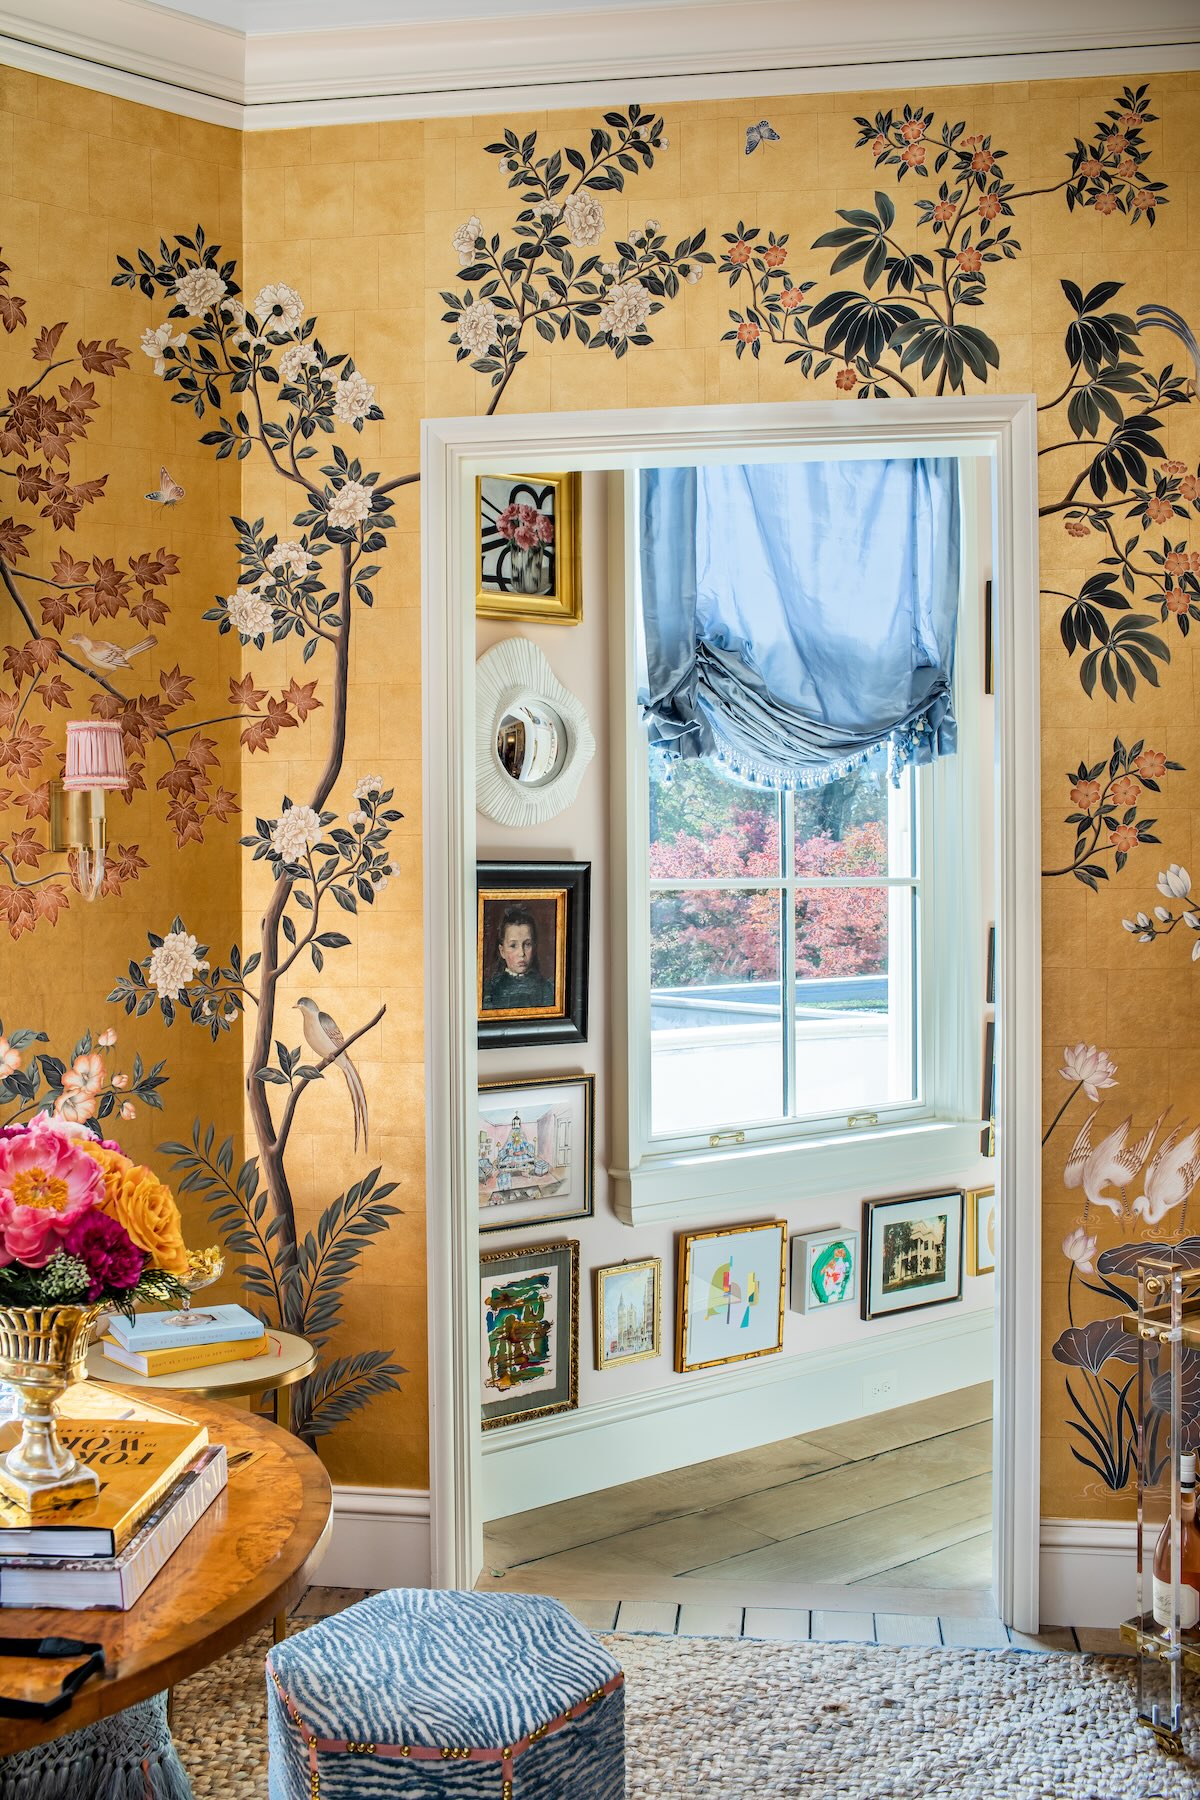 A gallery wall in a hallway next to a room wrapped in golden chinoiserie.